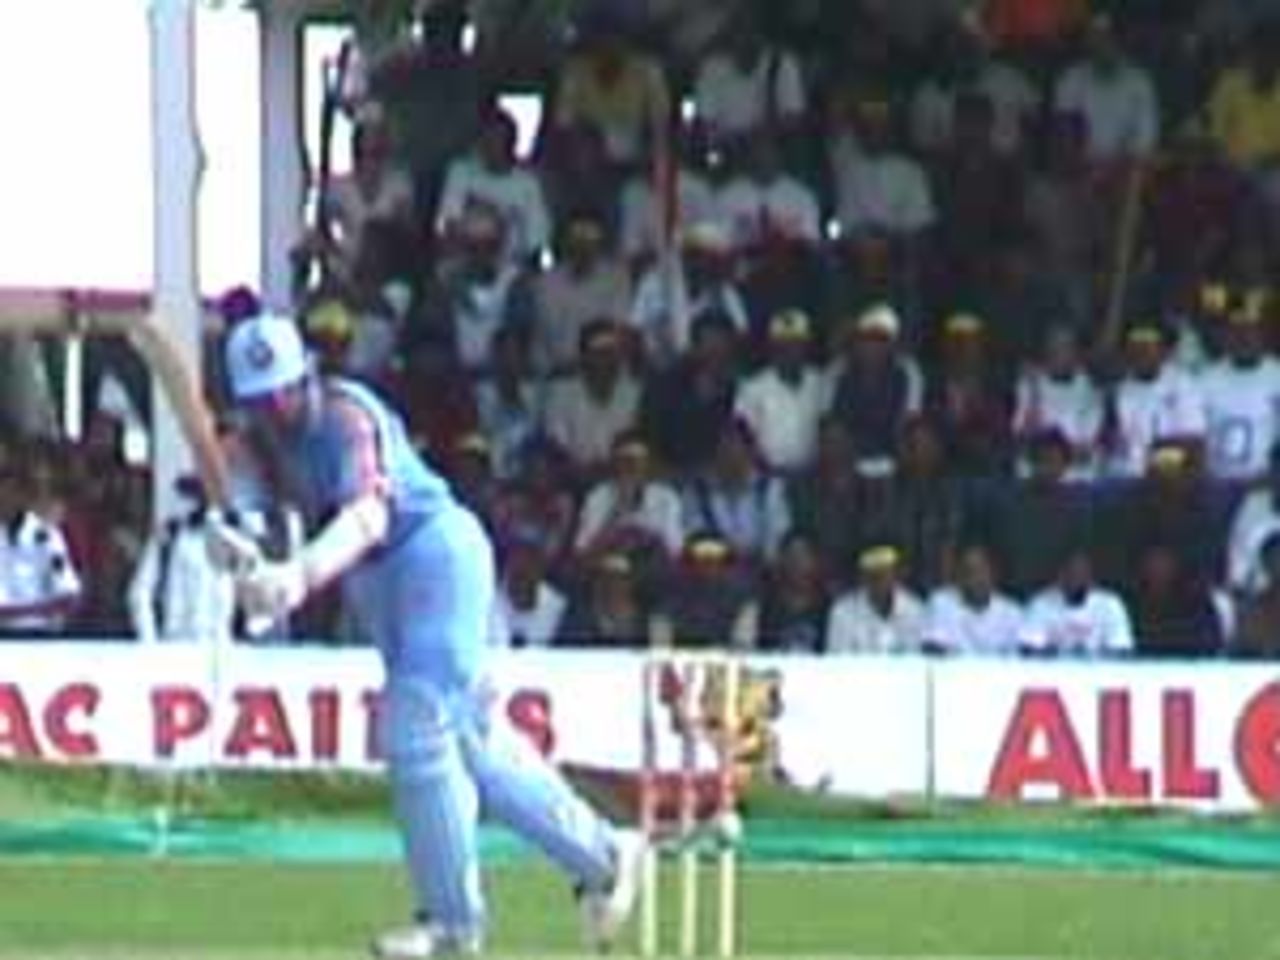 Dravid whips the ball through the onside, India v West Indies (3rd ODI), Coca-Cola Singapore Challenge, 1999-2000, Kallang Ground, Singapore, 5 Sep 1999.